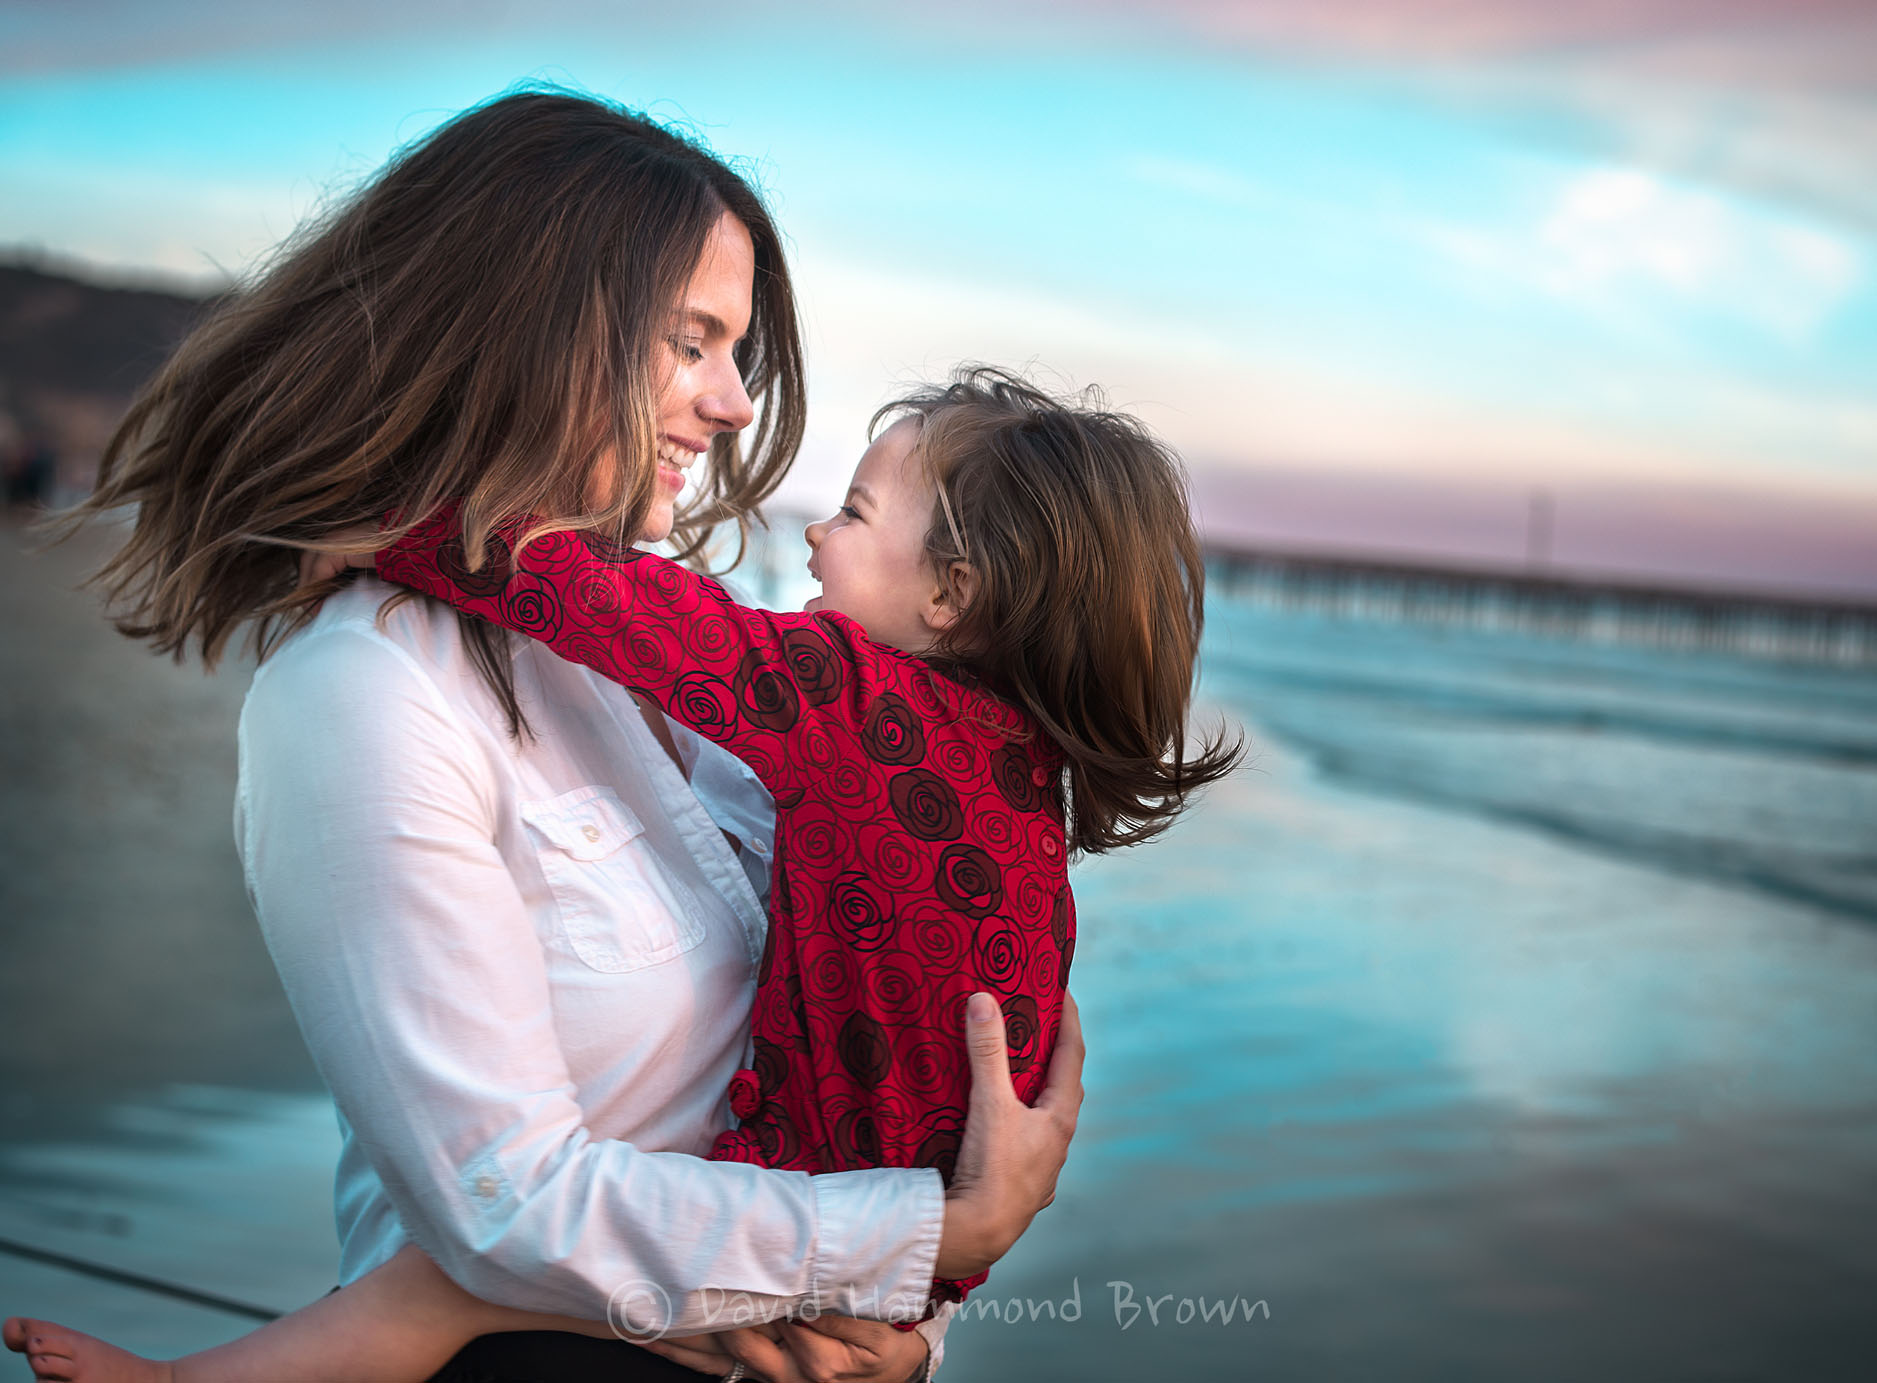 David Hammond Brown Photography - Mother and Daughter